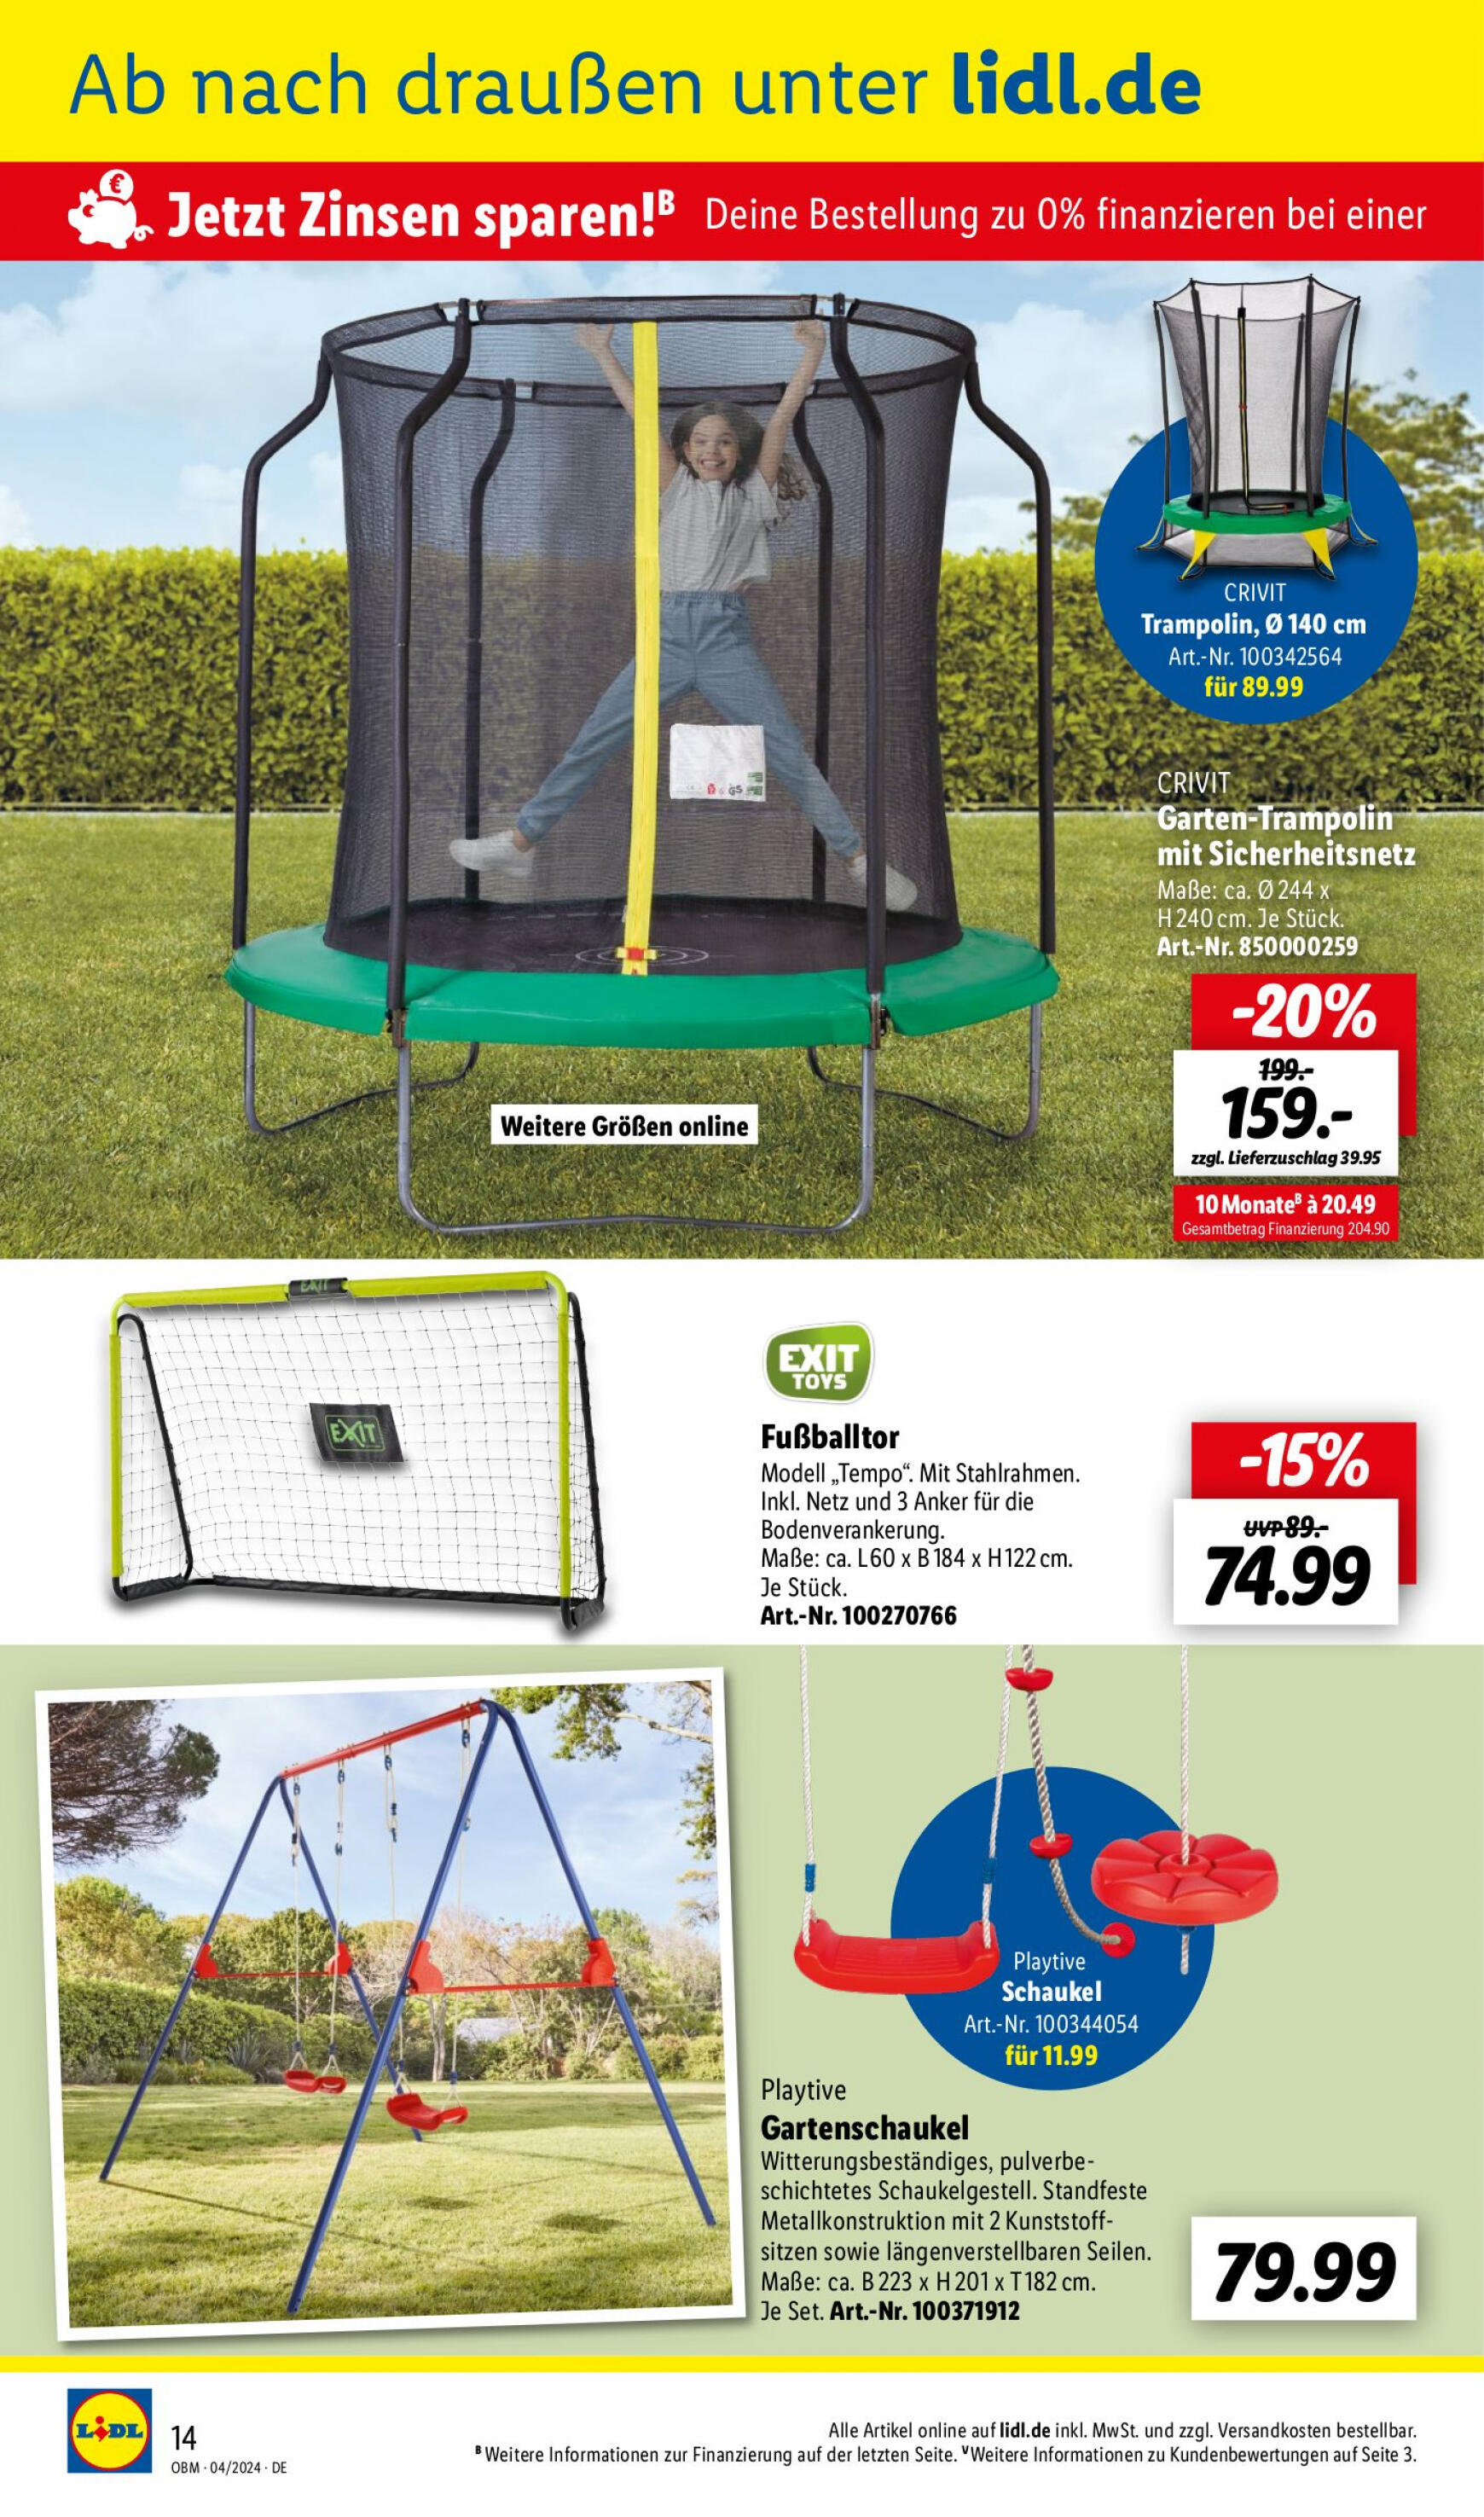 lidl - Flyer Lidl - Aktuelle Onlineshop-Highlights aktuell 01.04. - 30.04. - page: 14